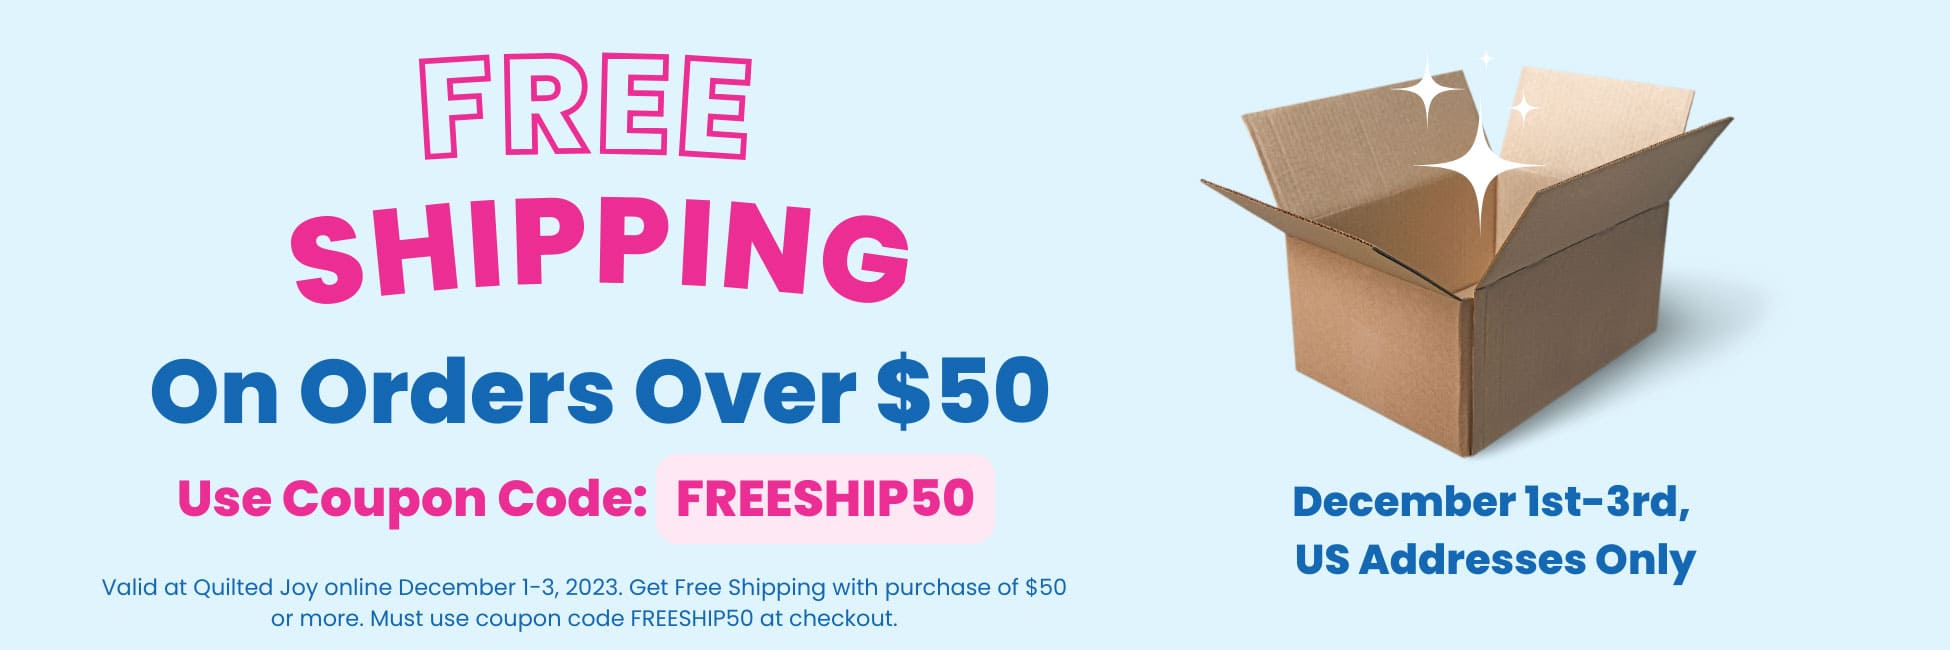 Free Shipping on orders of $50 or more